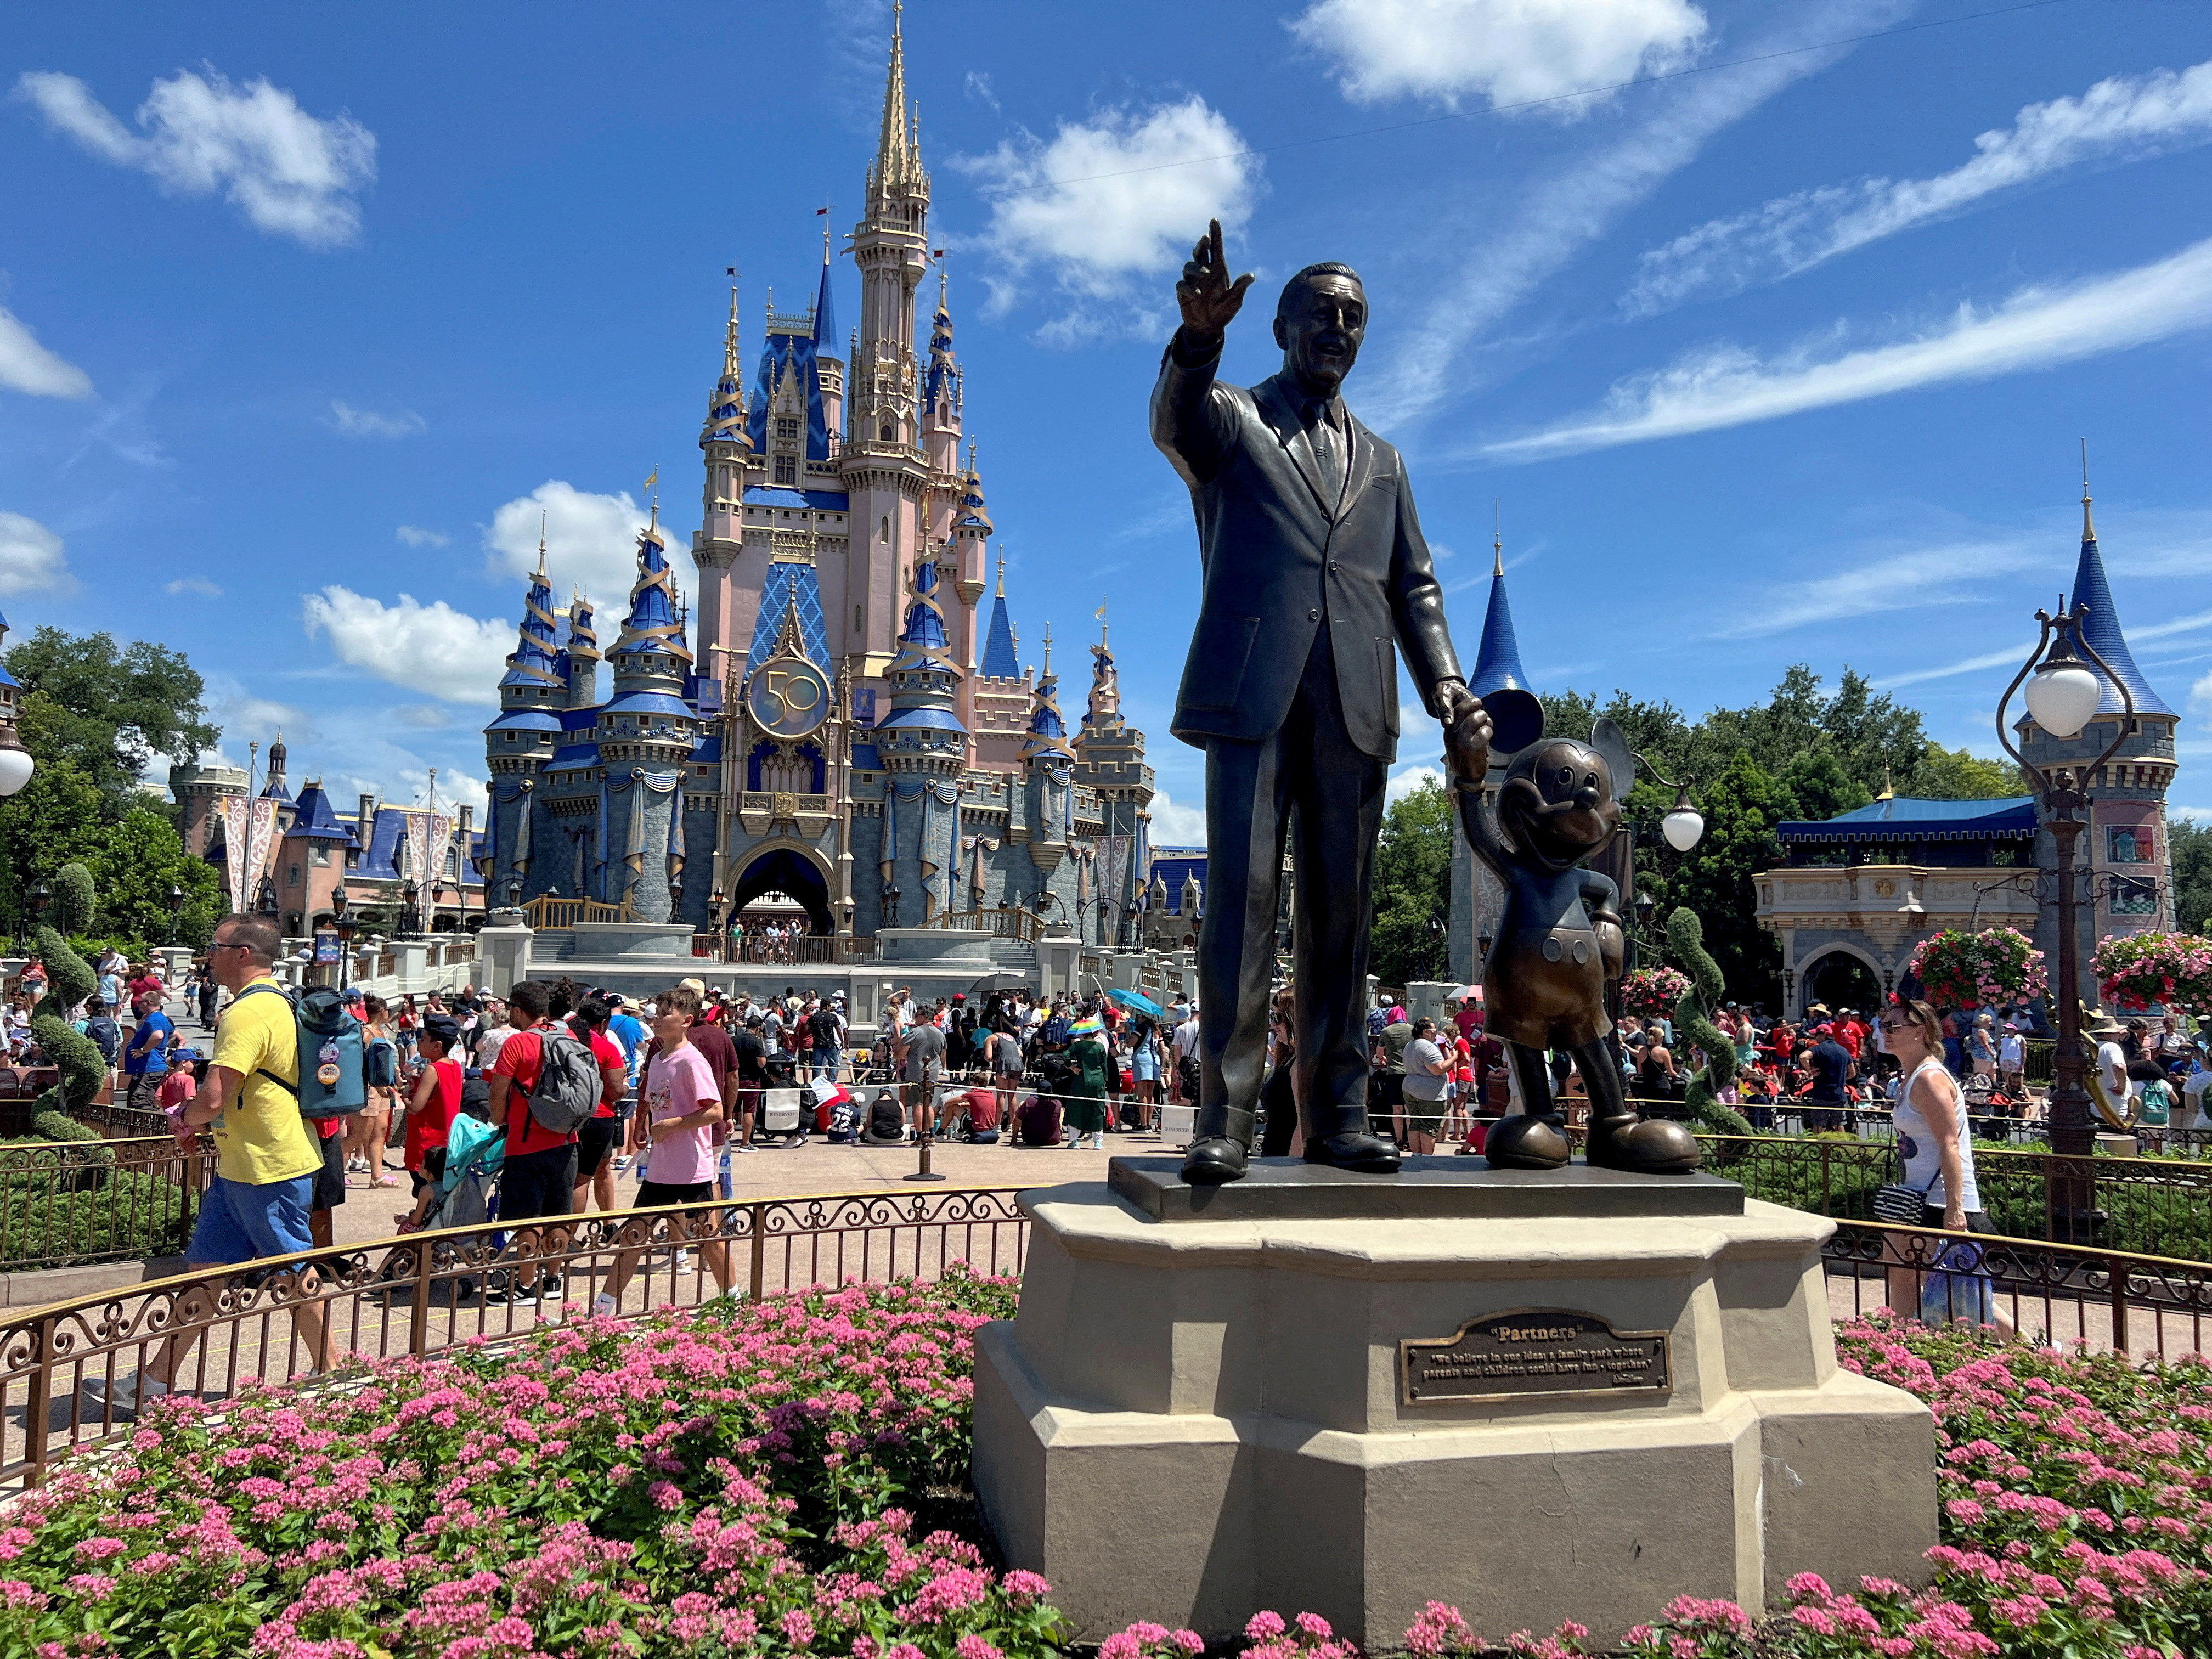 People gather at the Magic Kingdom theme park before the “Festival of Fantasy” parade at Walt Disney World in Orlando, Florida, in July 2022. Photo: Reuters